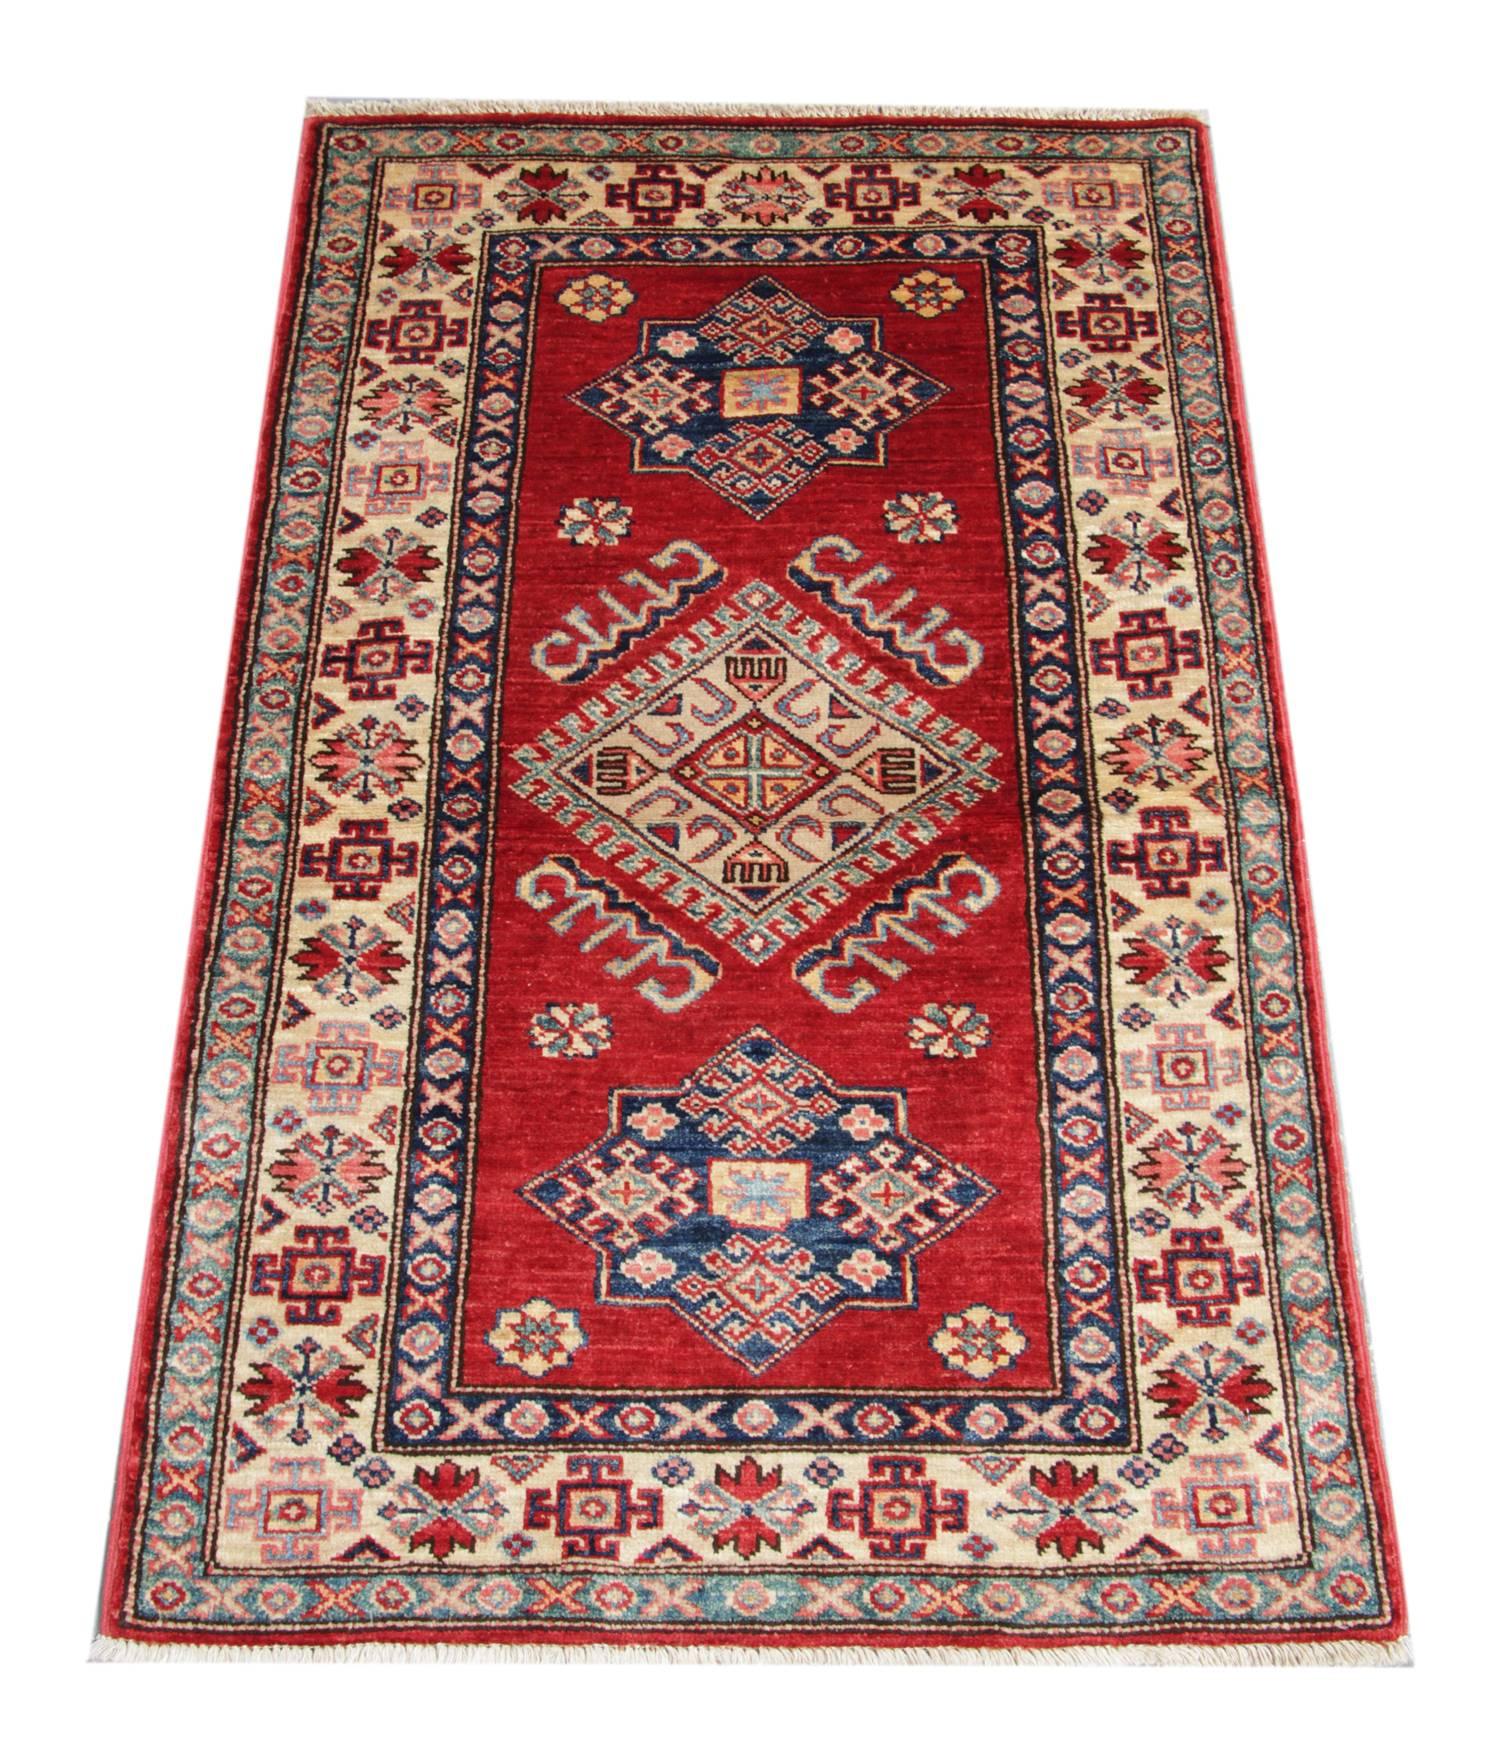 This new traditional hand-woven rug is featuring designs from the Kazak region. Traditional rugs are making the region of the Northern Persia. This floral rug has been made by Afghan weavers of top quality wool and cotton.  All over this tribal rug,